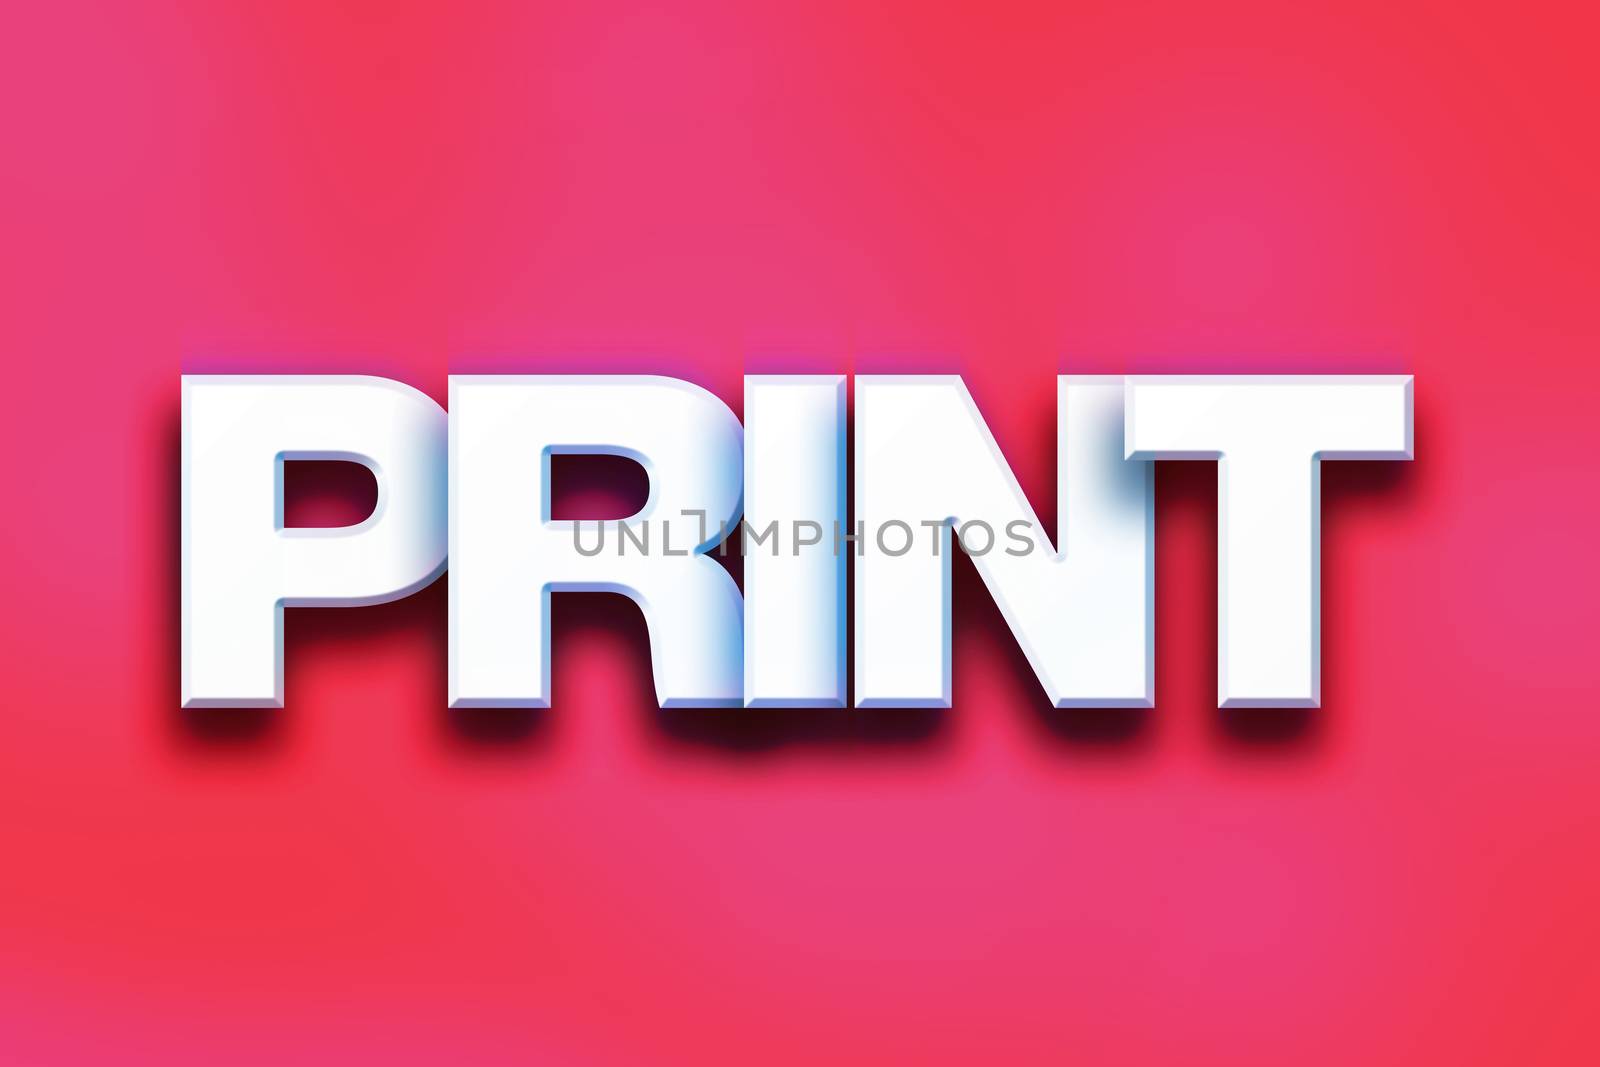 The word "Print" written in white 3D letters on a colorful background concept and theme.